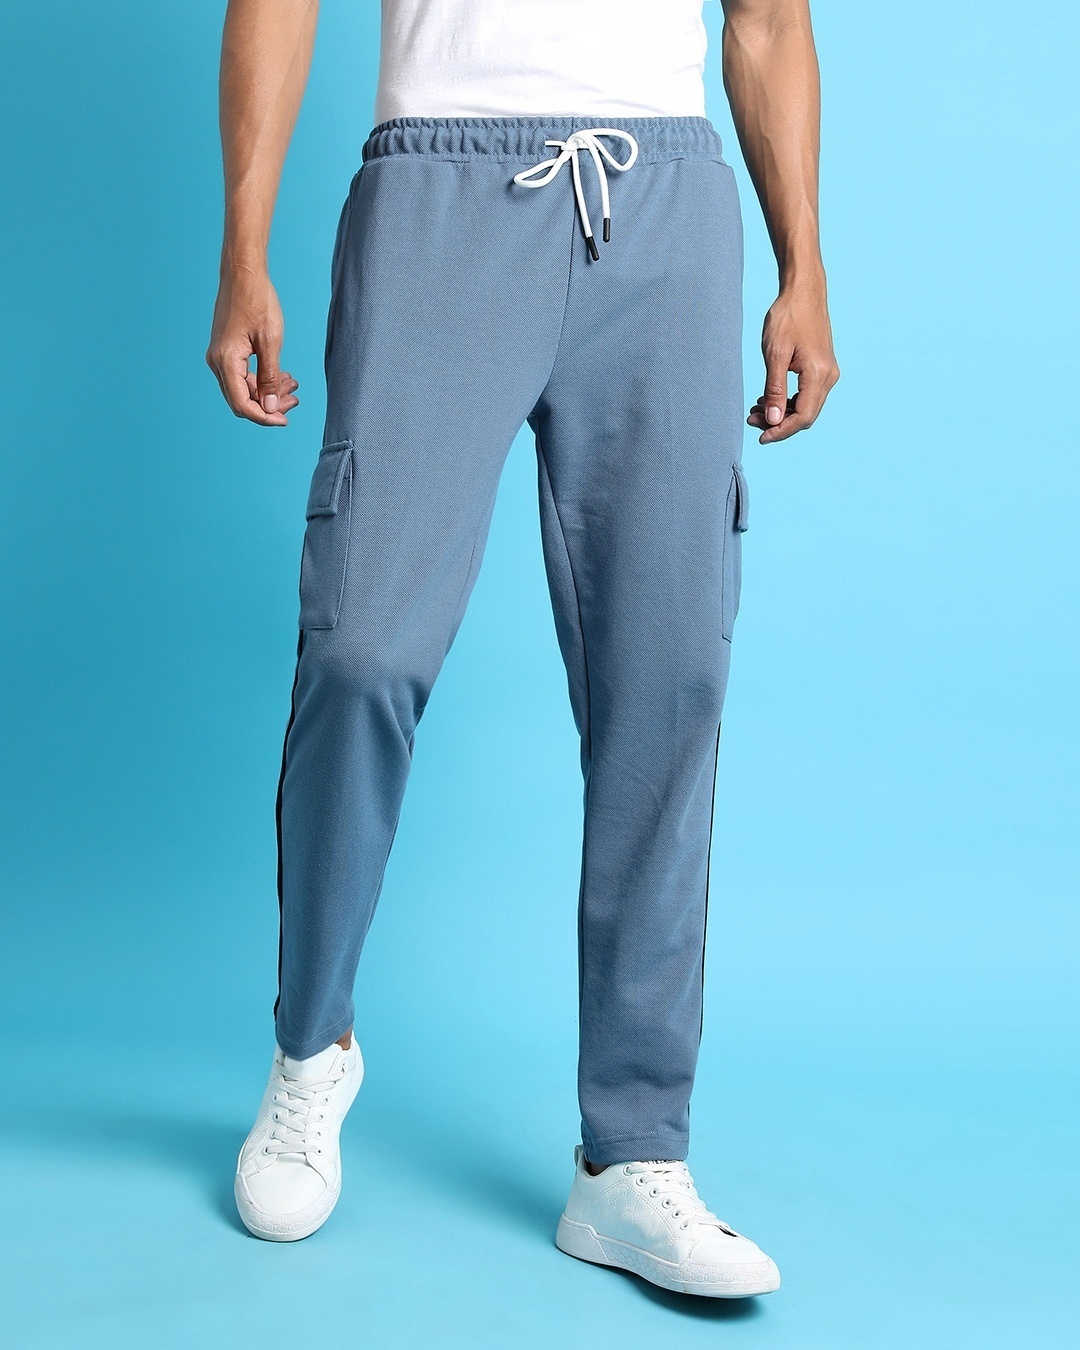 Mens 100% Cotton Track Pants /pants at best price in Jalandhar by Gag Wears  | ID: 10183837397